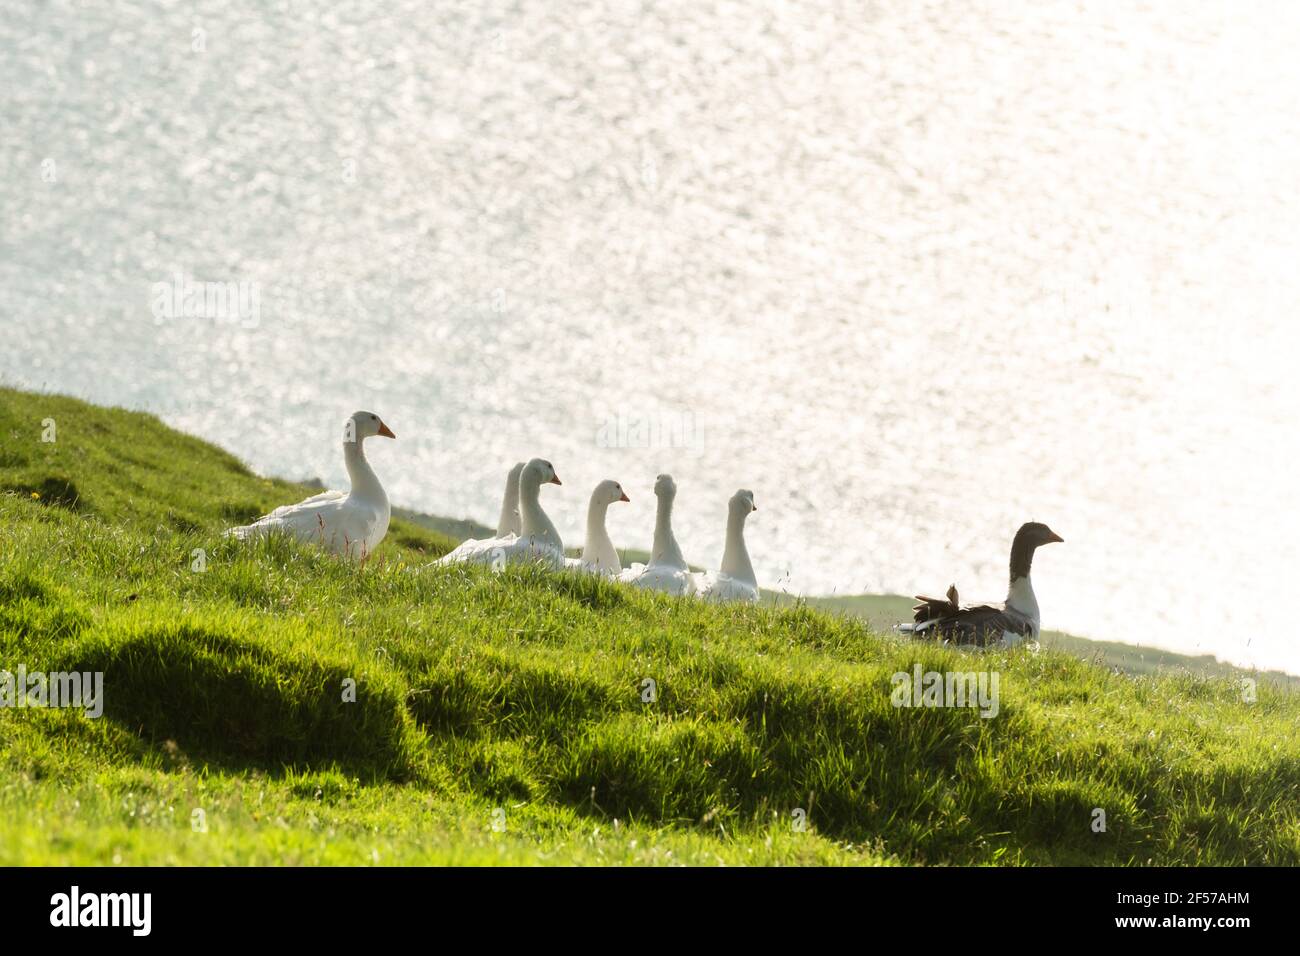 White and gray domestic geese in green grass Stock Photo